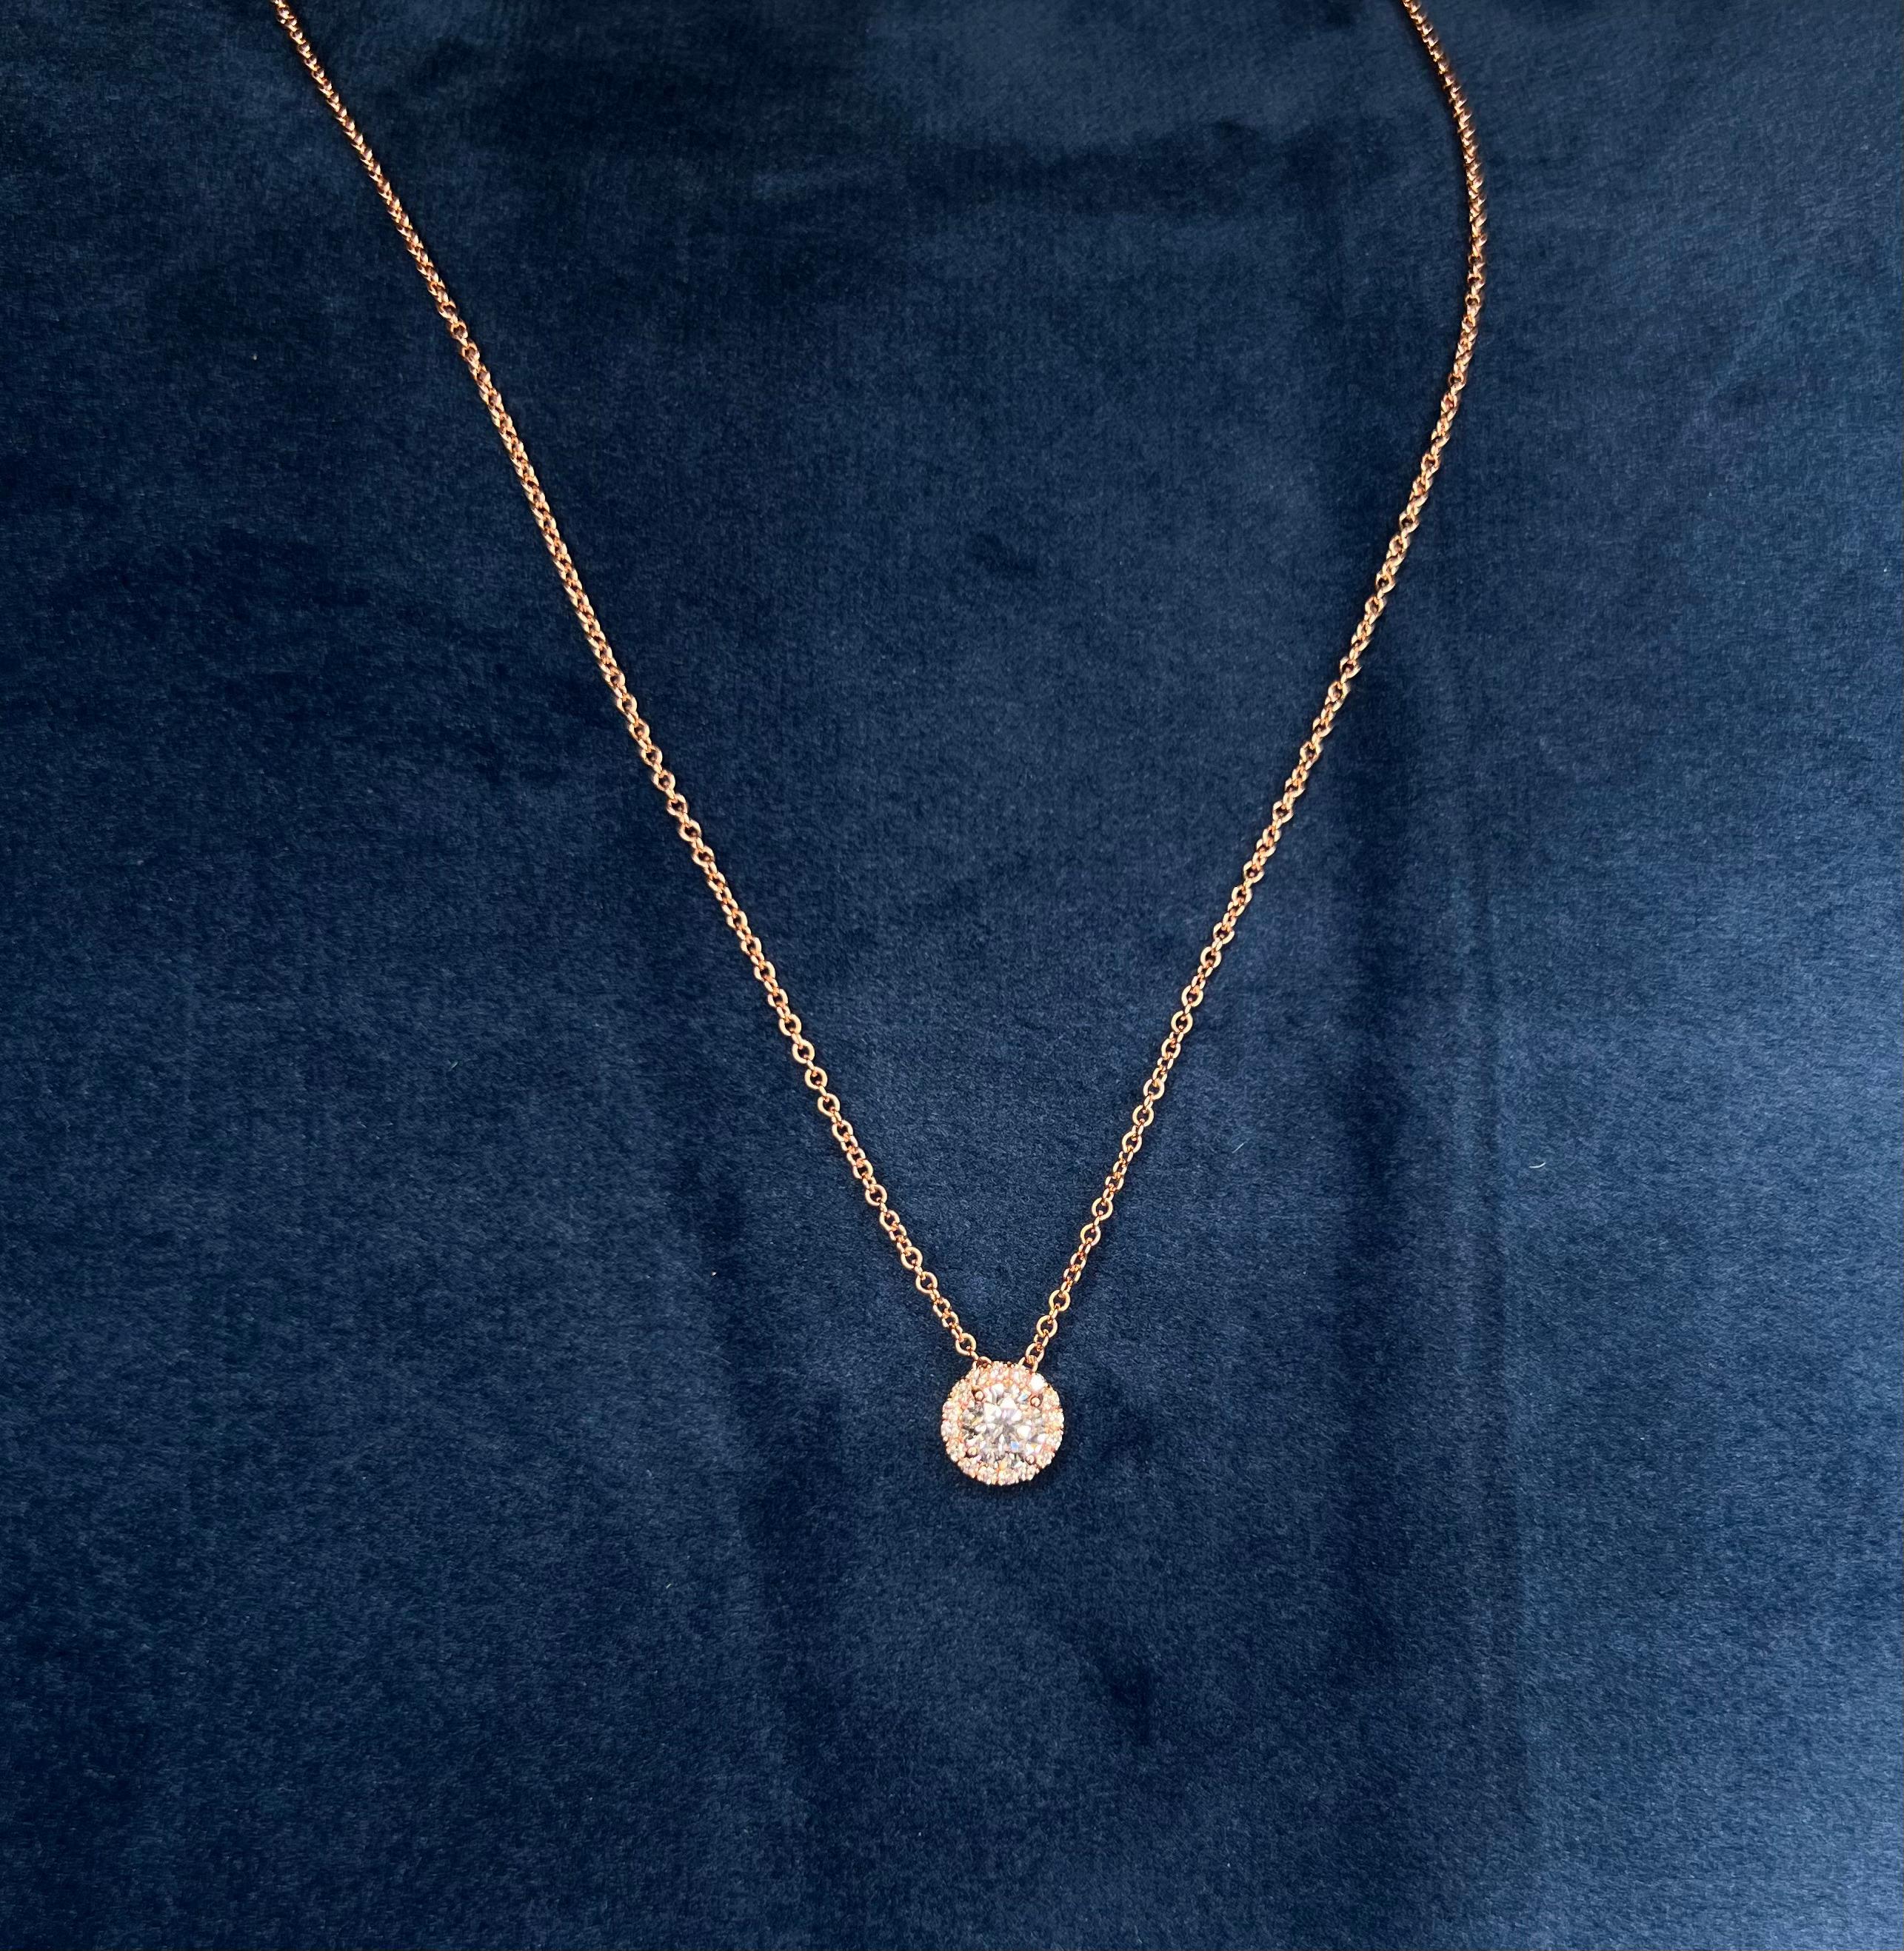 14k Yellow Gold 0.90 Carat Round Cut Diamond Solitaire Pendant Necklace In New Condition For Sale In Los Angeles, CA